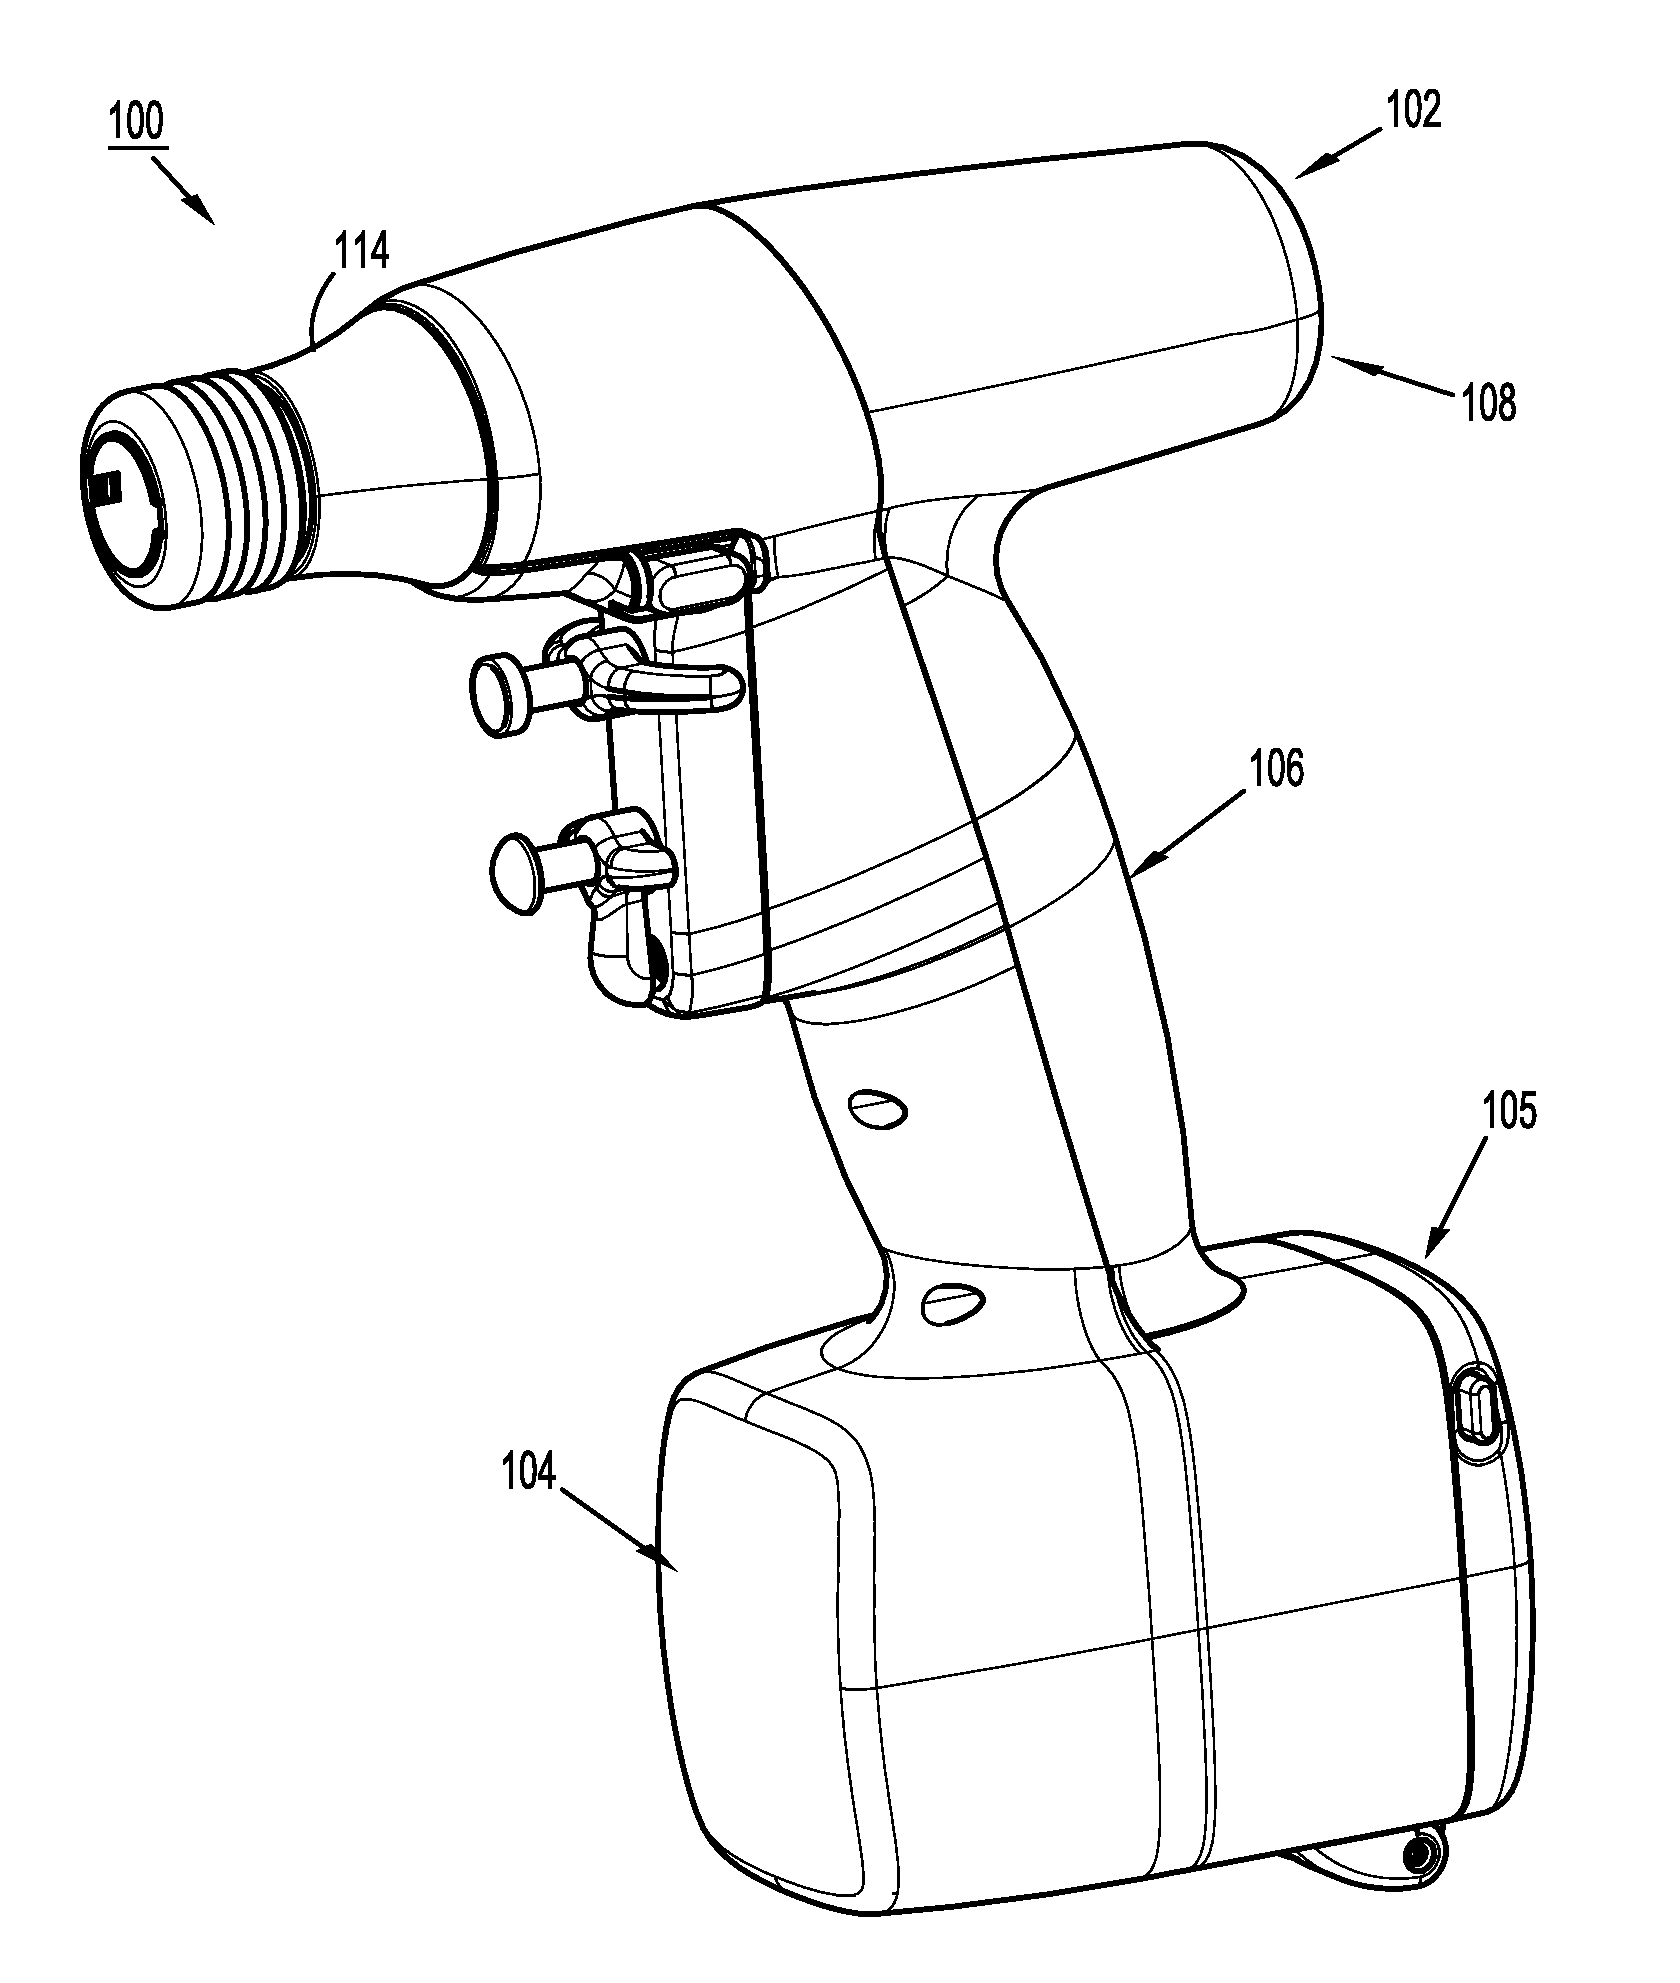 Hand held electromechanical surgical system including battery compartment diagnostic display